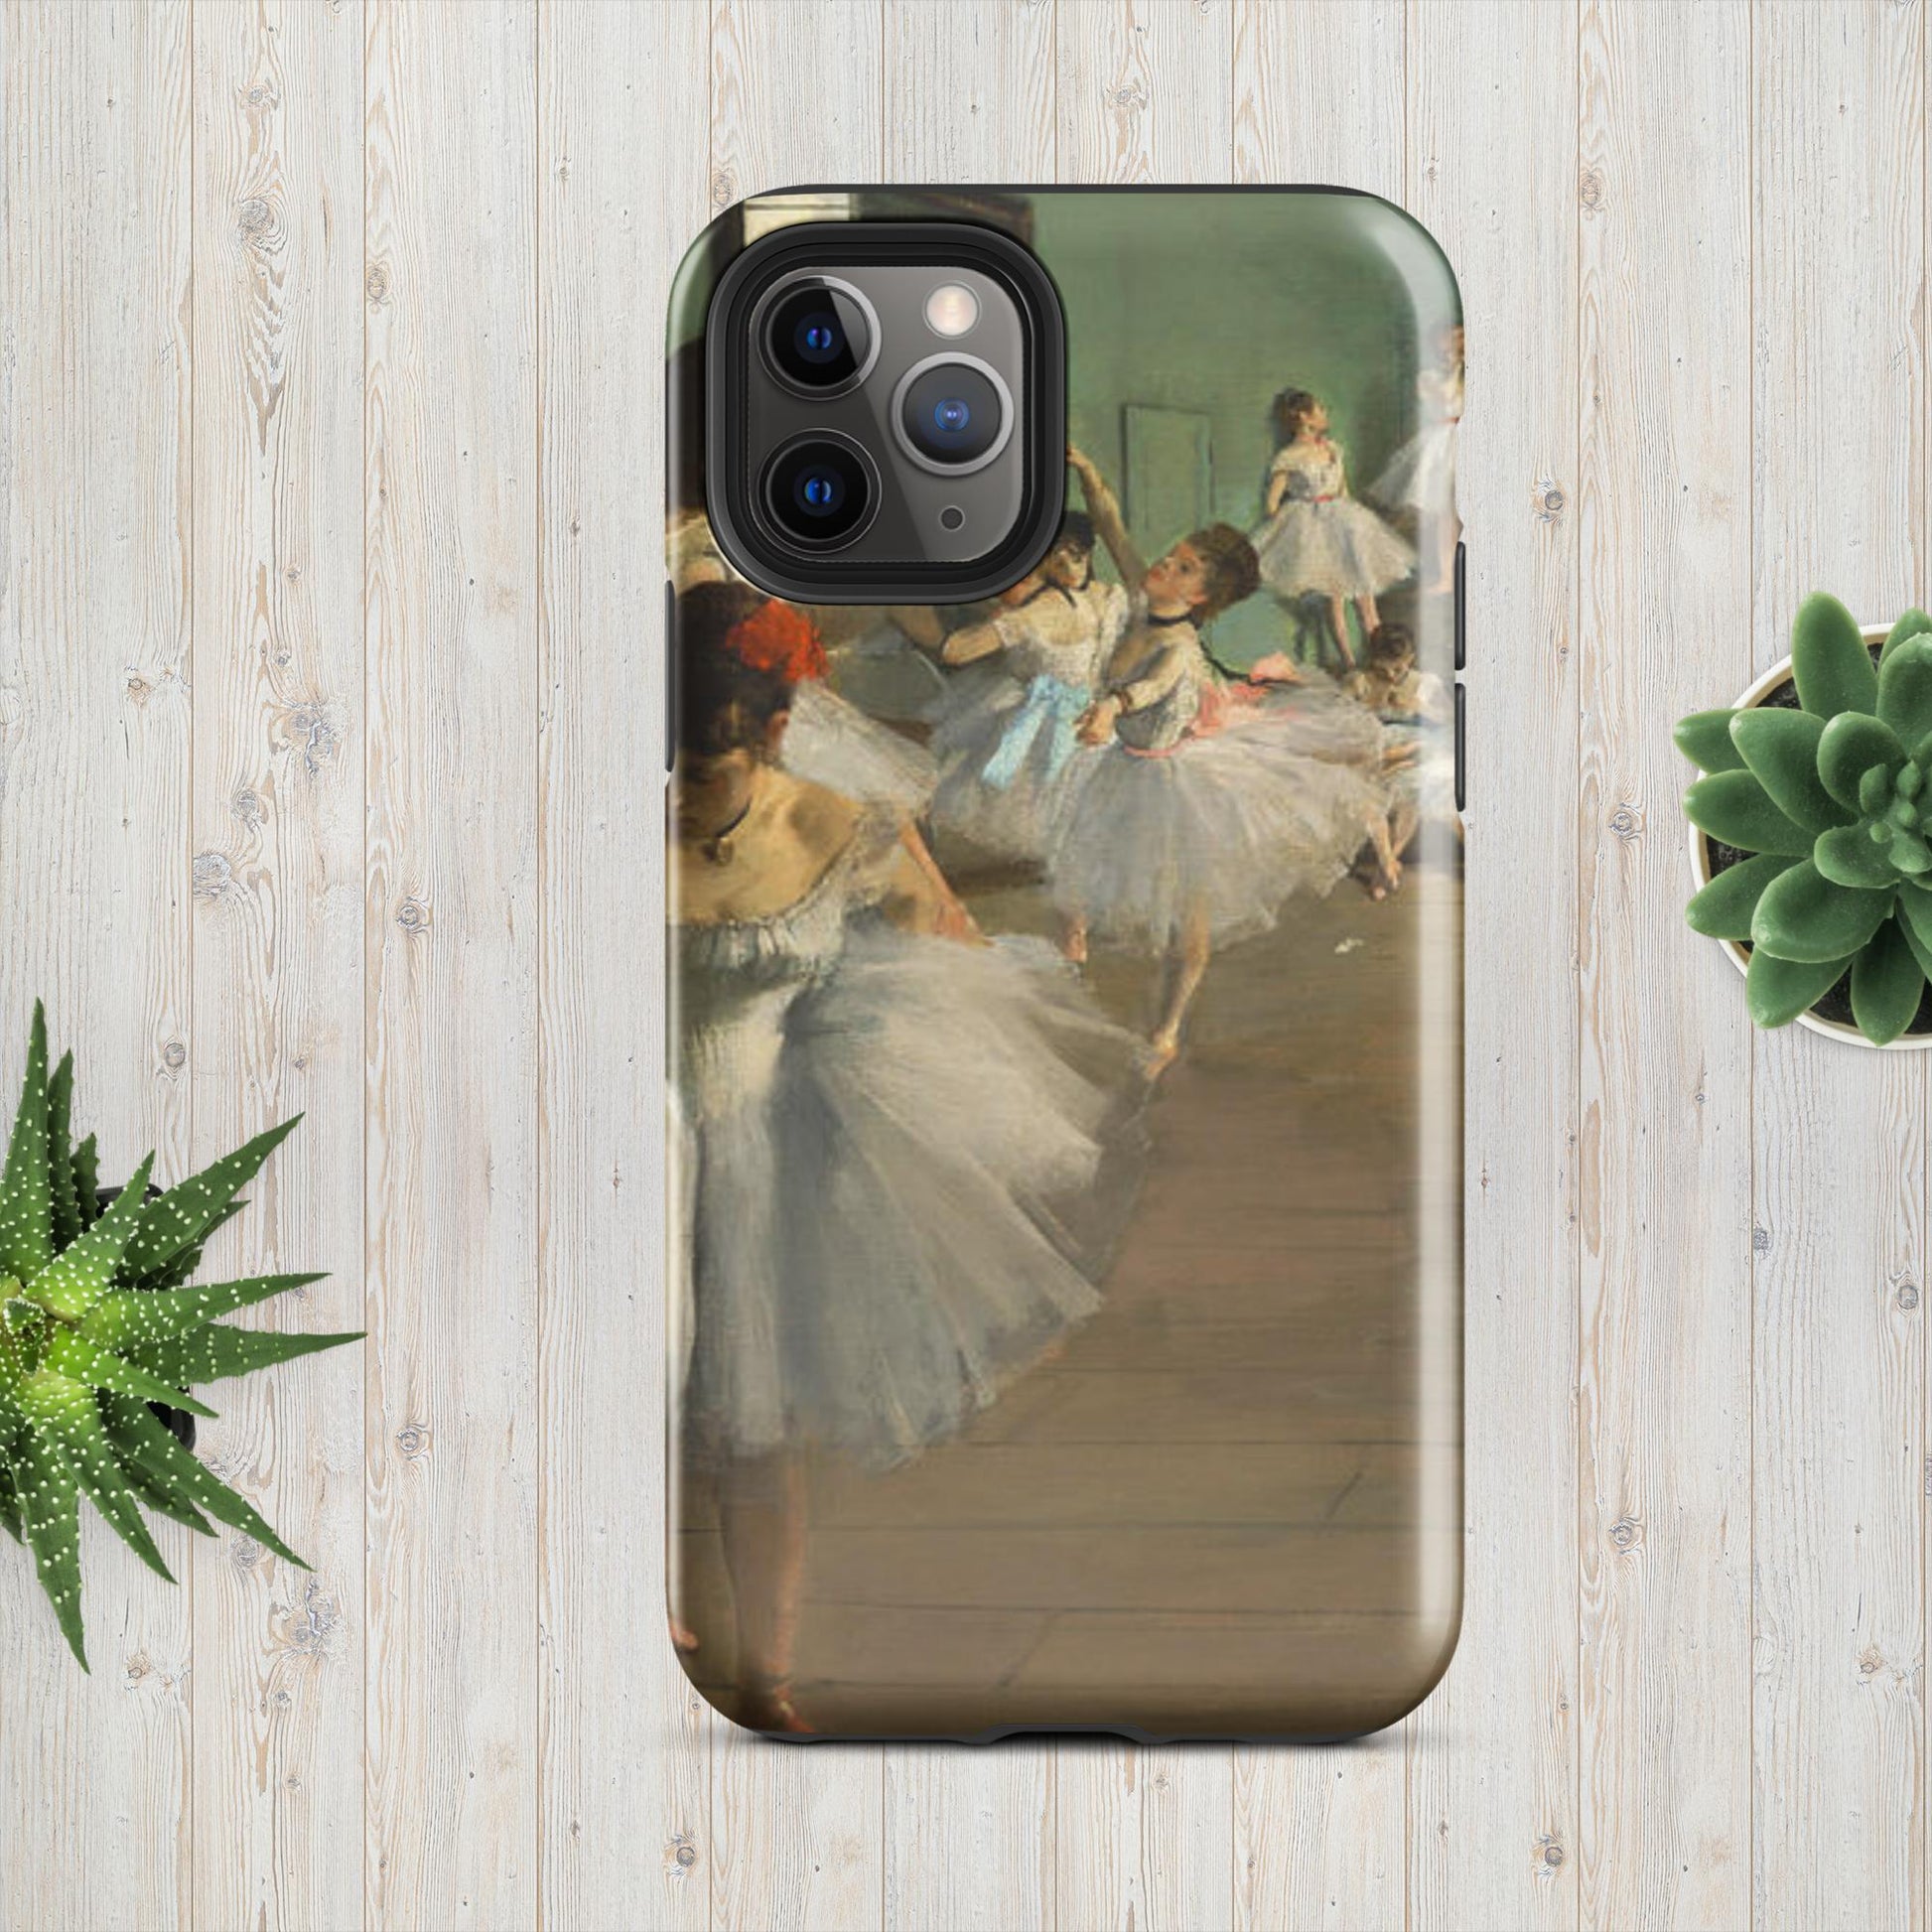 The Hologram Hook Up Glossy / iPhone 11 Pro Edgar's Dance Tough Case for iPhone®